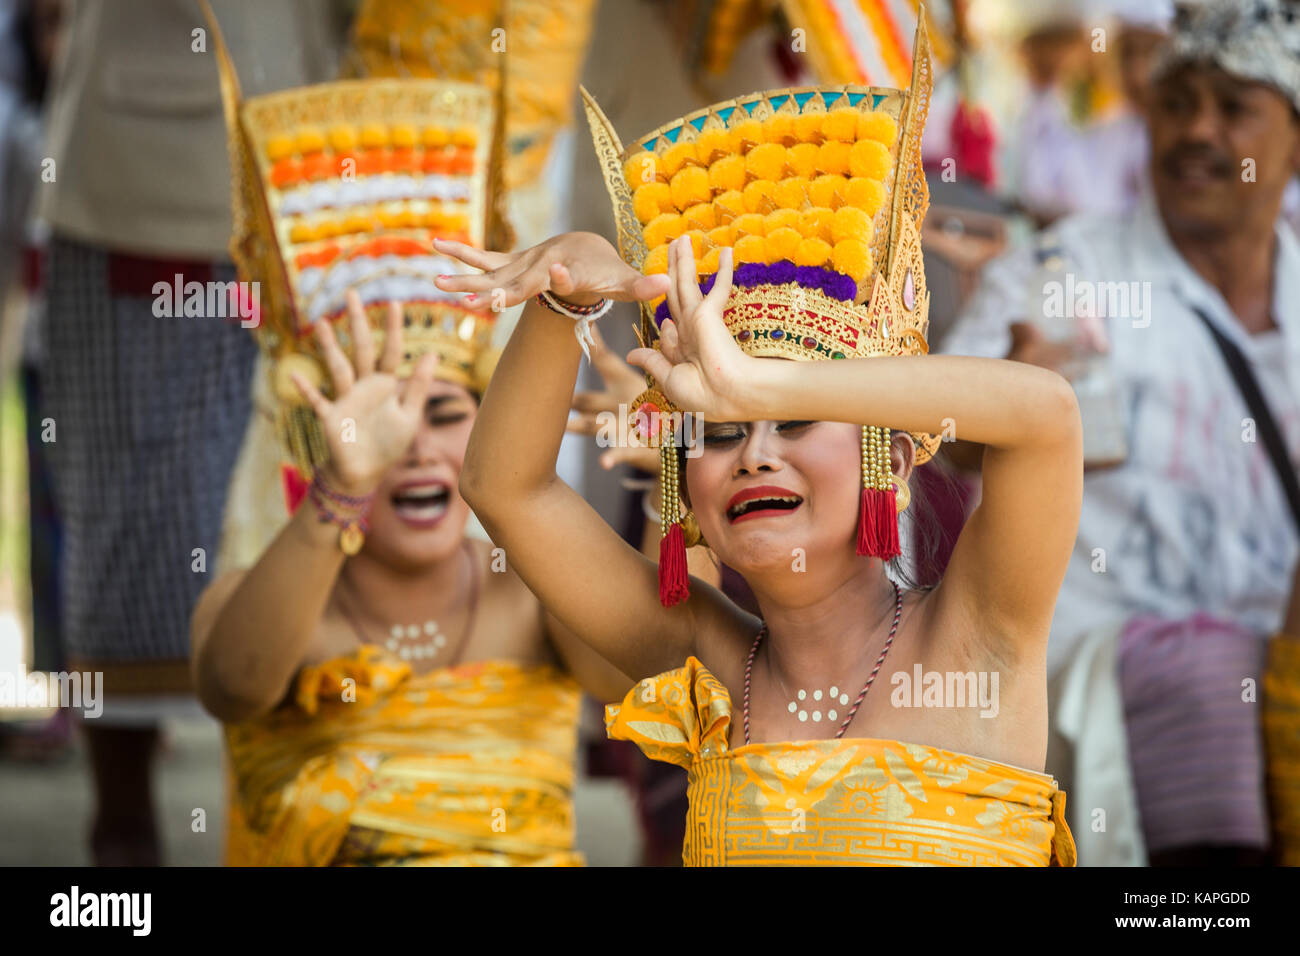 Two wailing women during a traditional Balinese cultural dance fall in to trance at this Bali dance ceremony on Kuningan day a religious Bali event Stock Photo